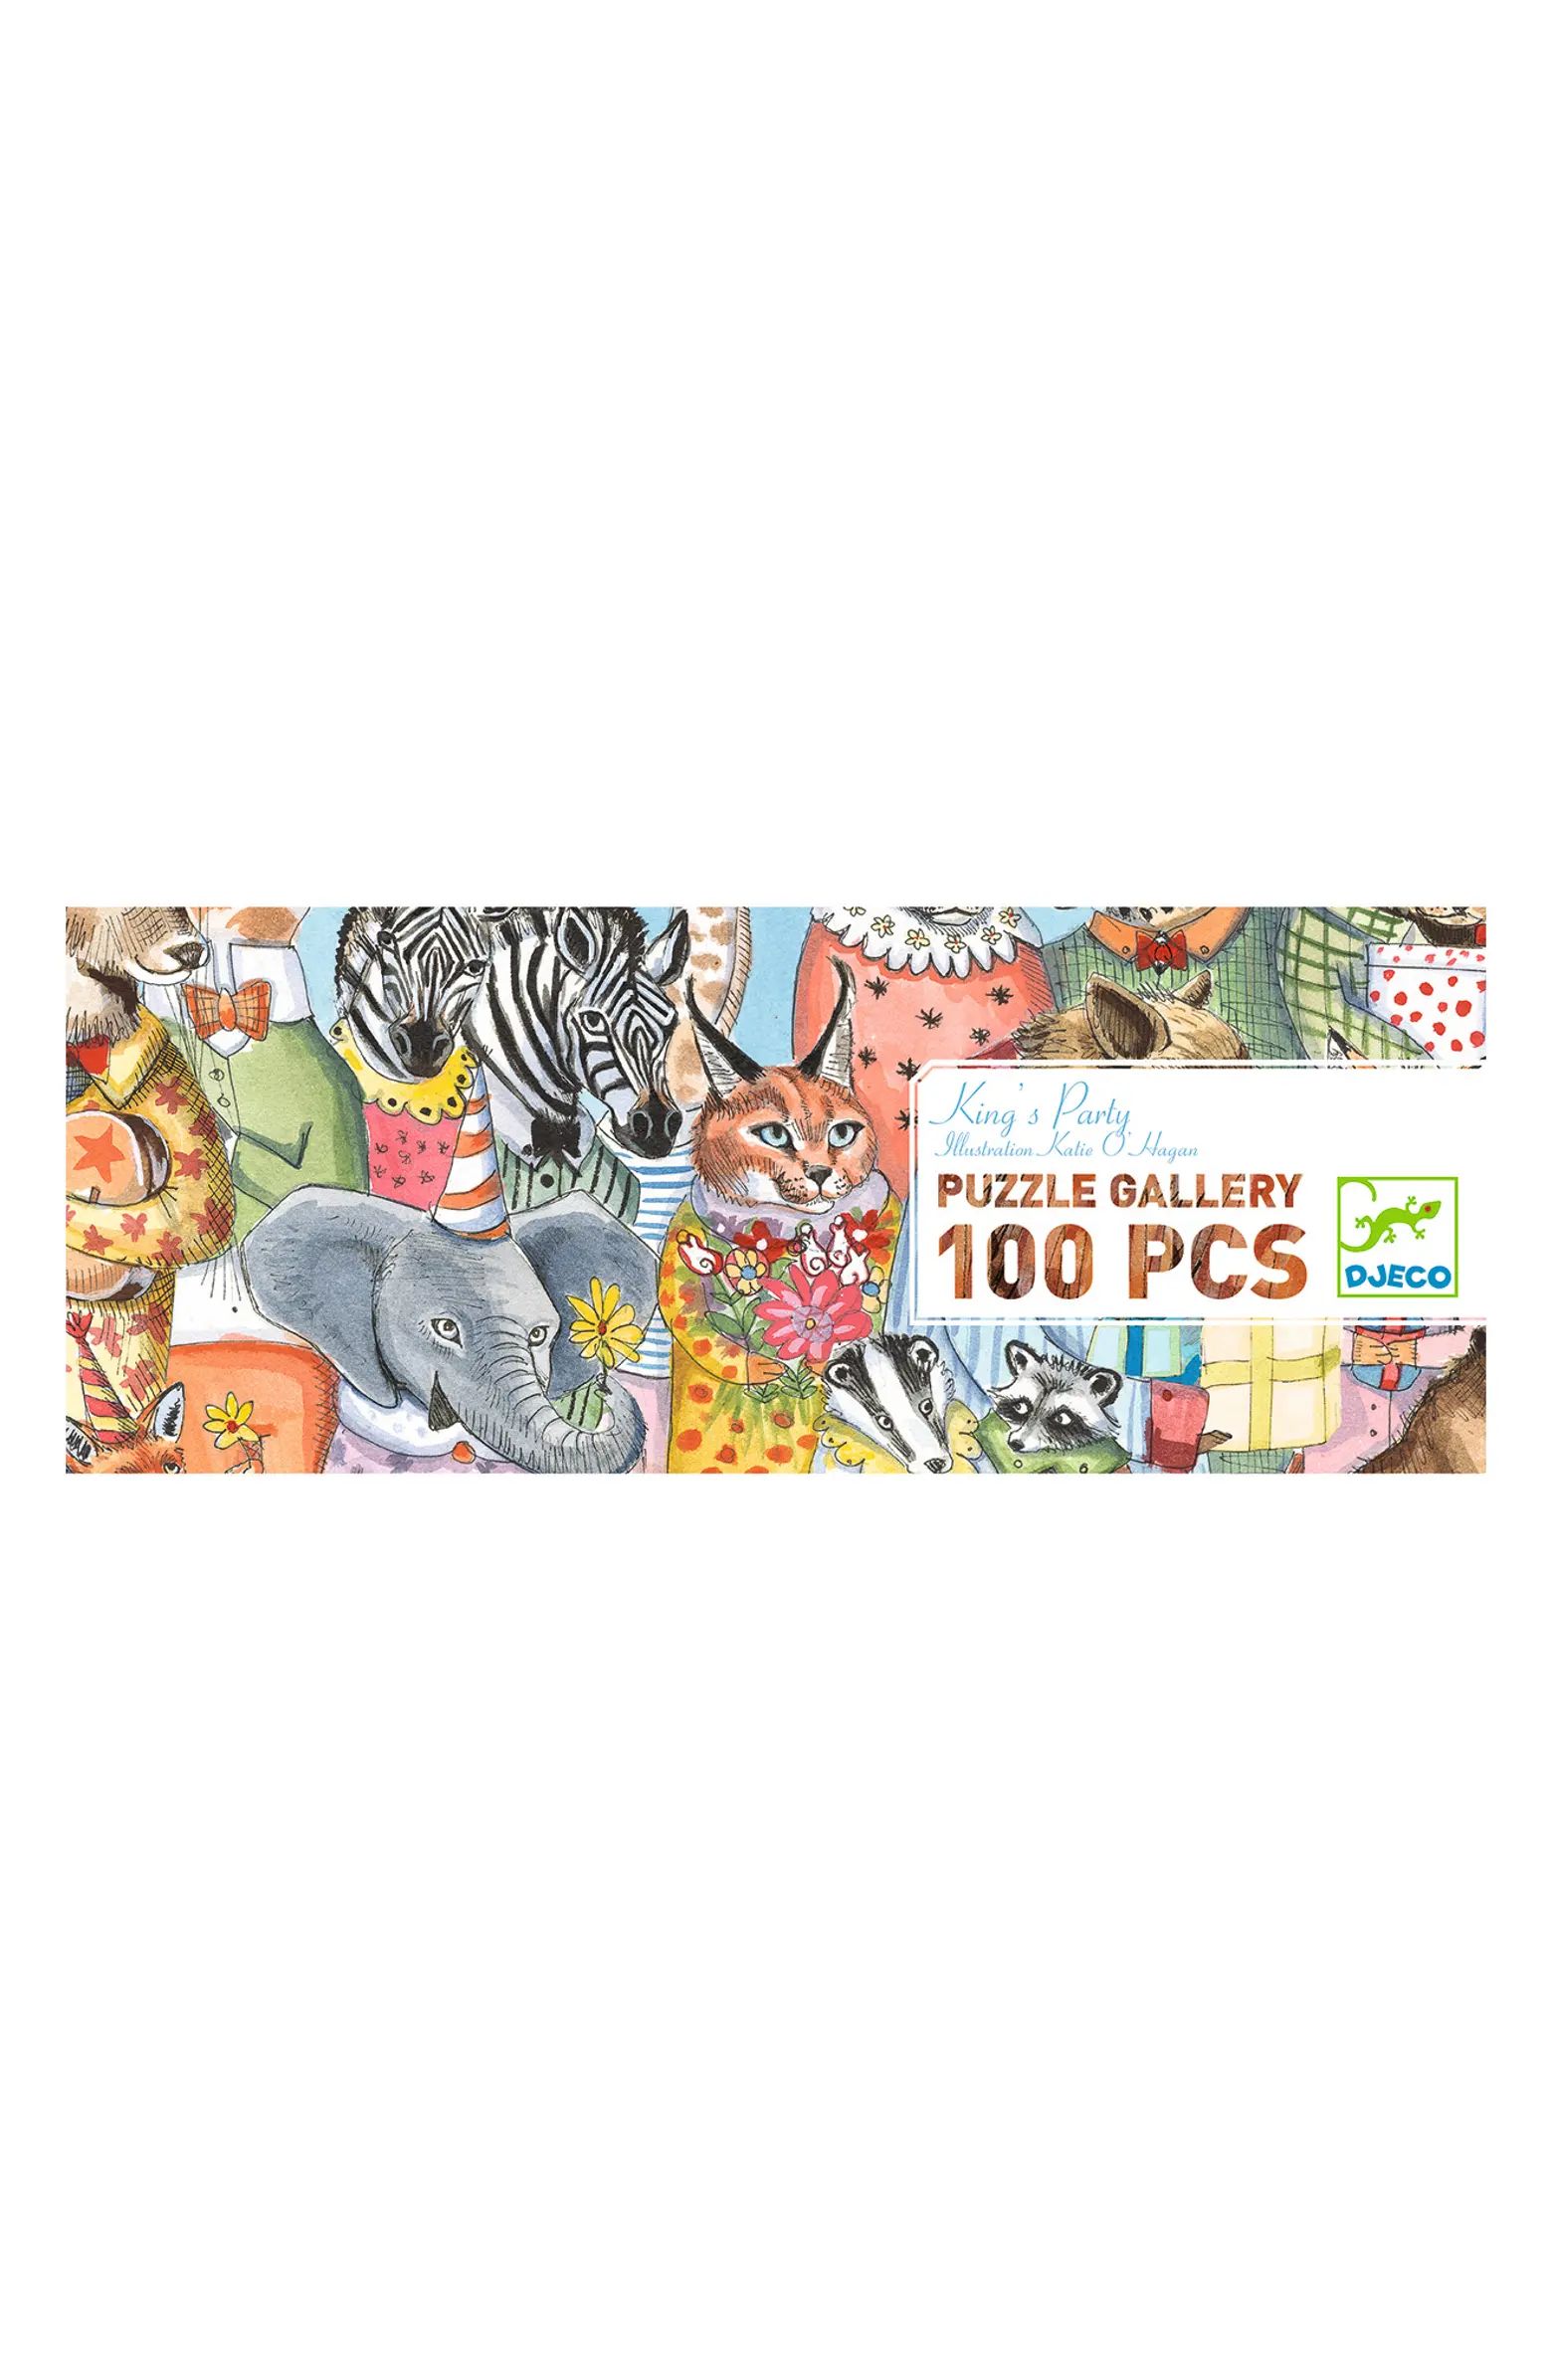 Djeco 100-Piece King's Party Gallery Jigsaw Puzzle | Nordstrom | Nordstrom